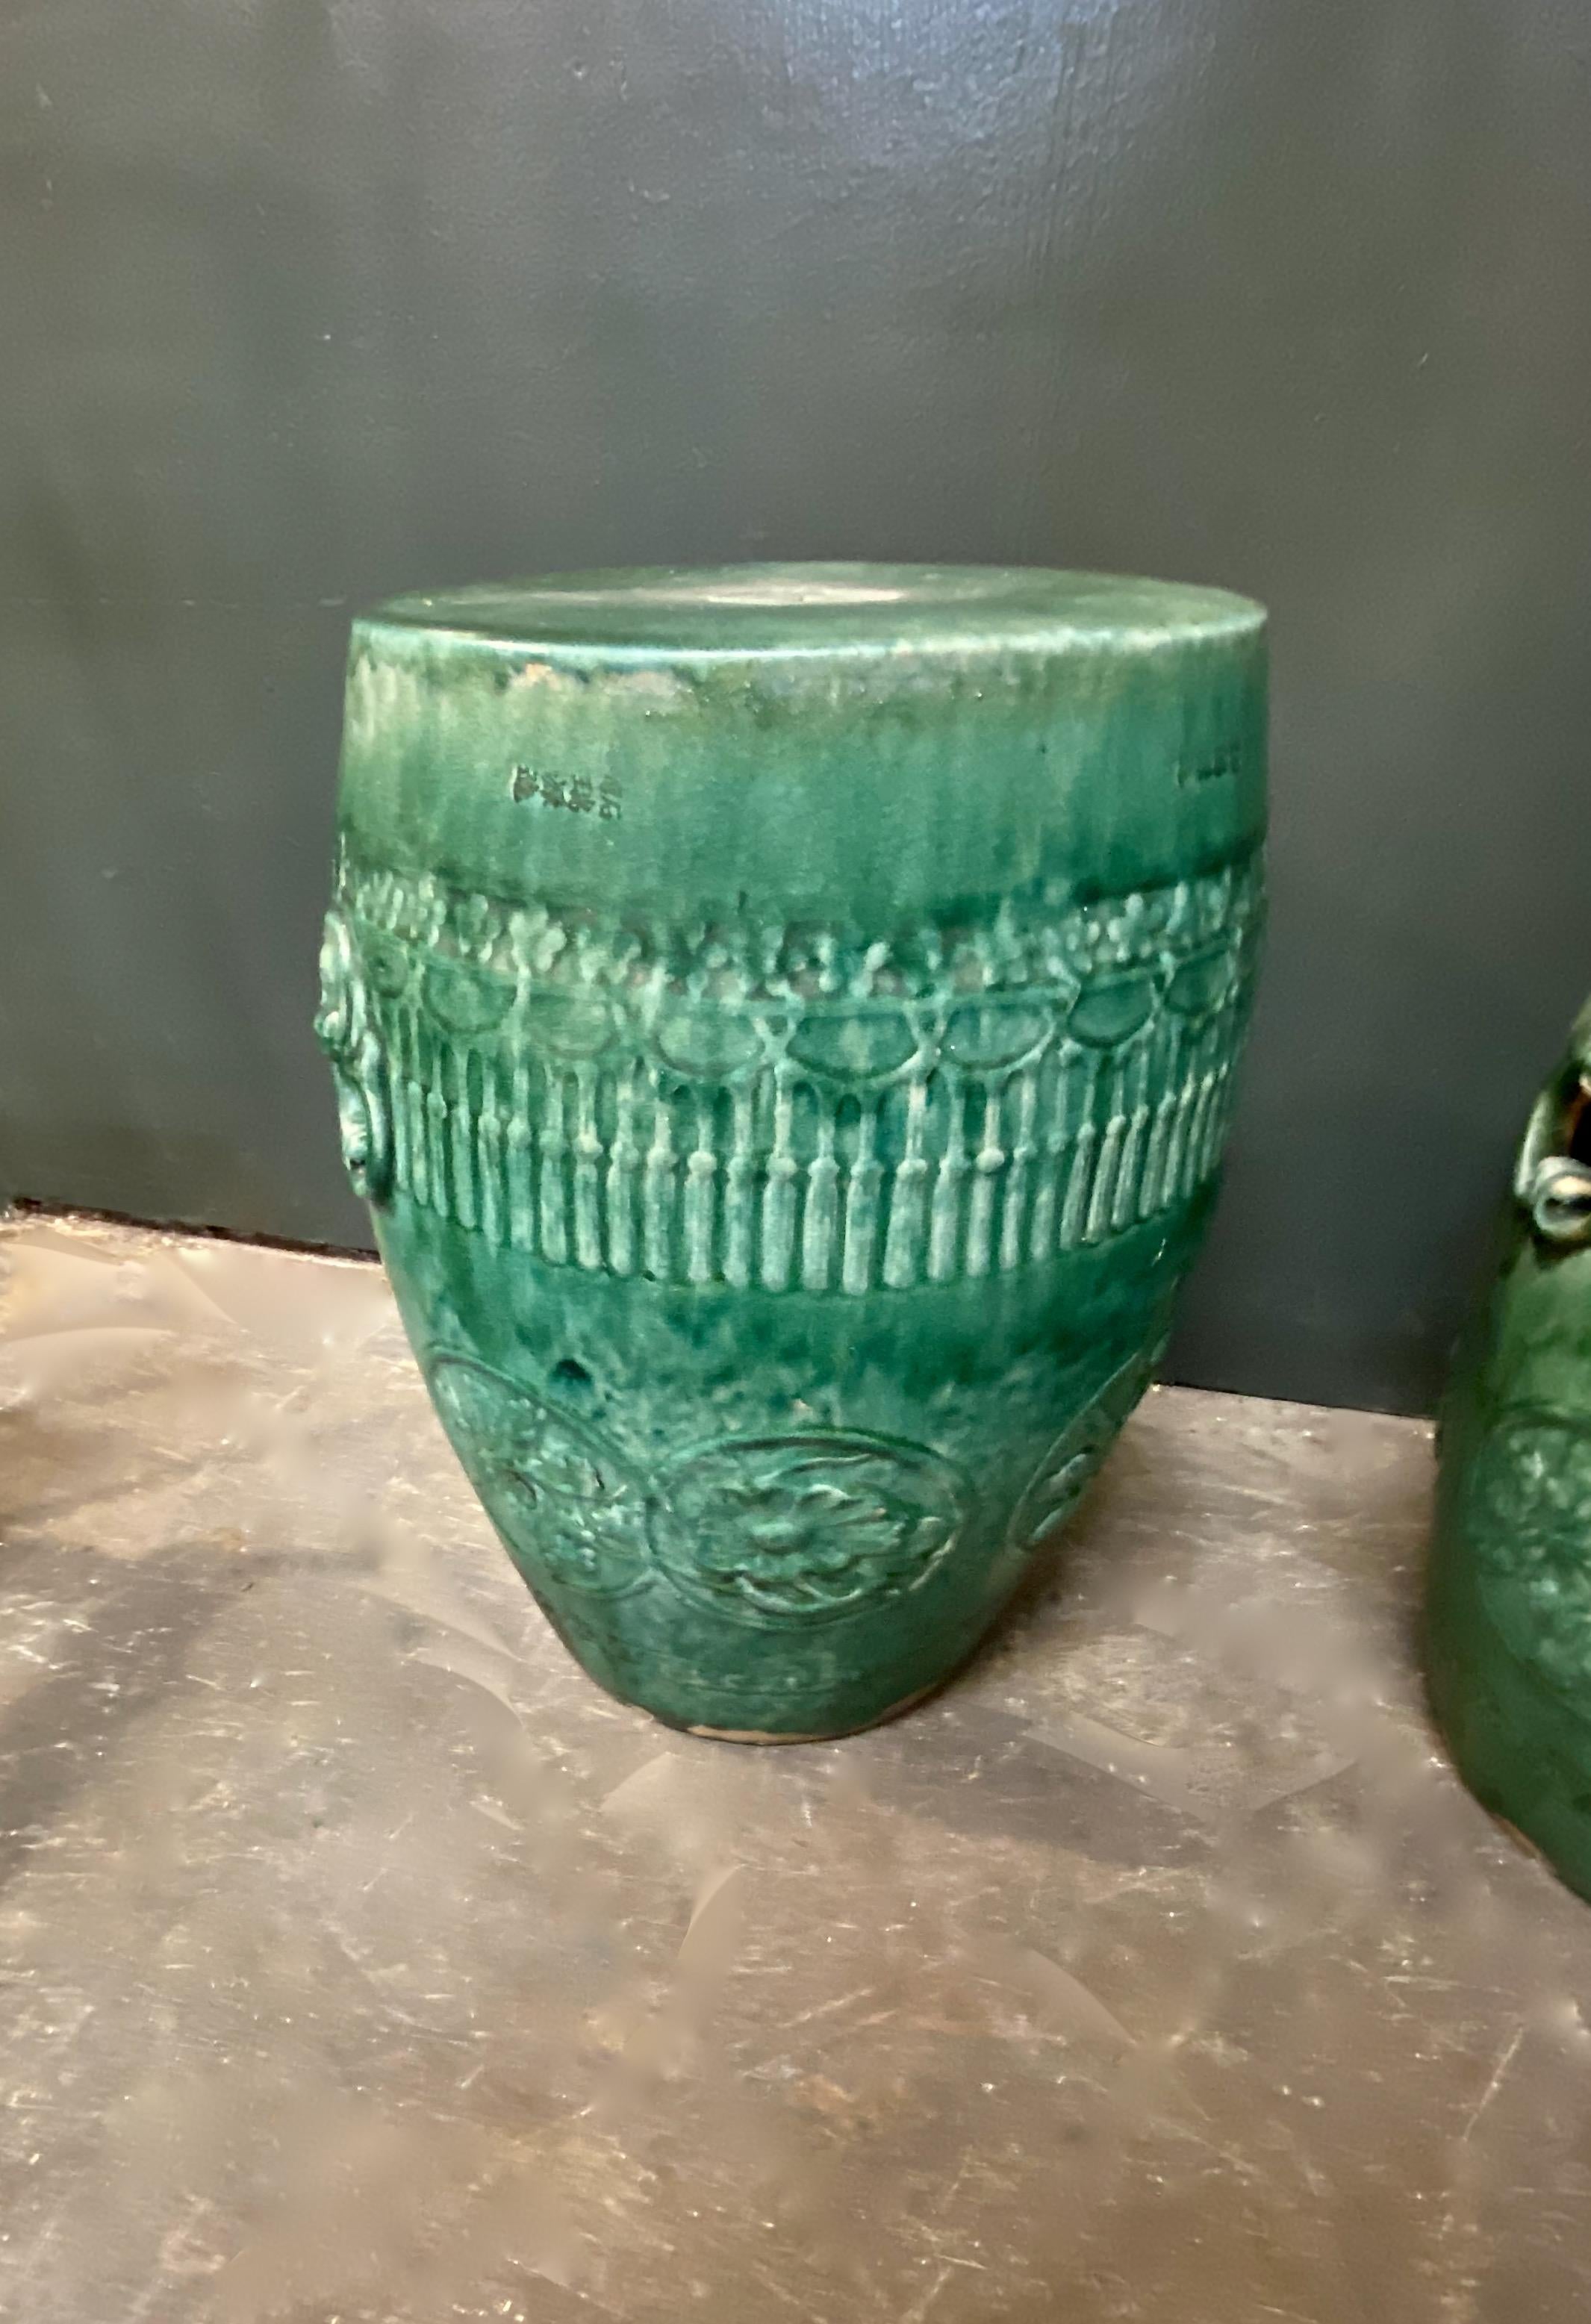 This is an outstanding pair of early to mid-20th century Chinese garden stools. The intense mottled green drip glaze of the stools combined with the perfect level of natural patina would make these stools the focal point of any room from mid-century